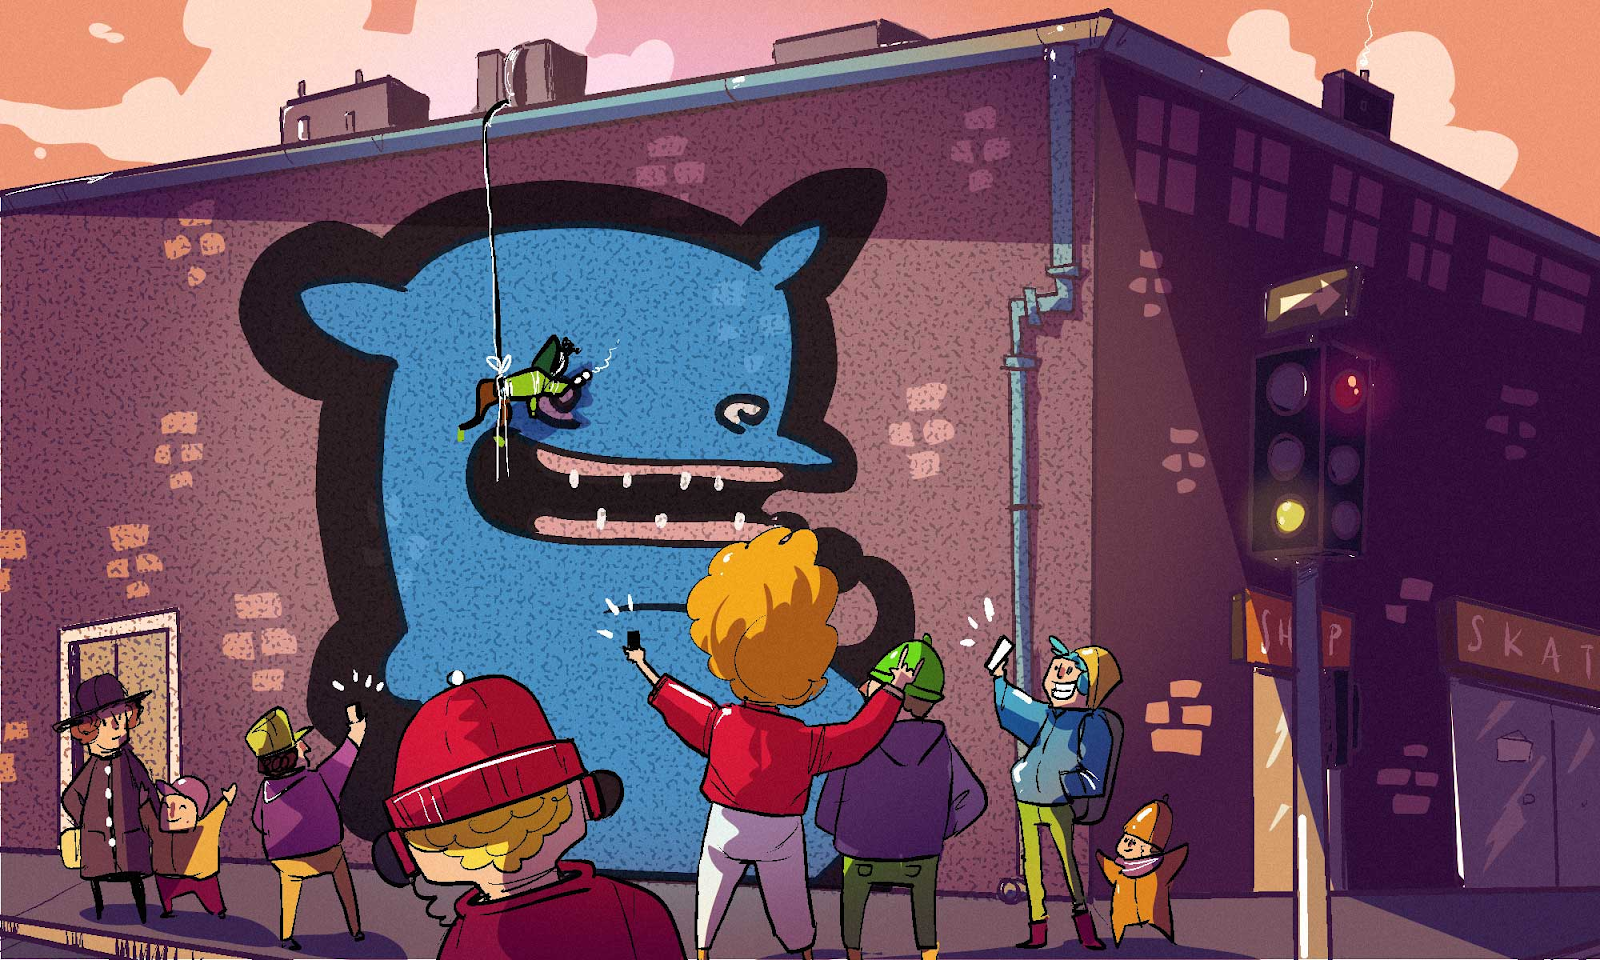 KIWIE 1001 To Launch Its First Batch Of Exclusive NFTs Depicting Real-Life Street Art On Rarible